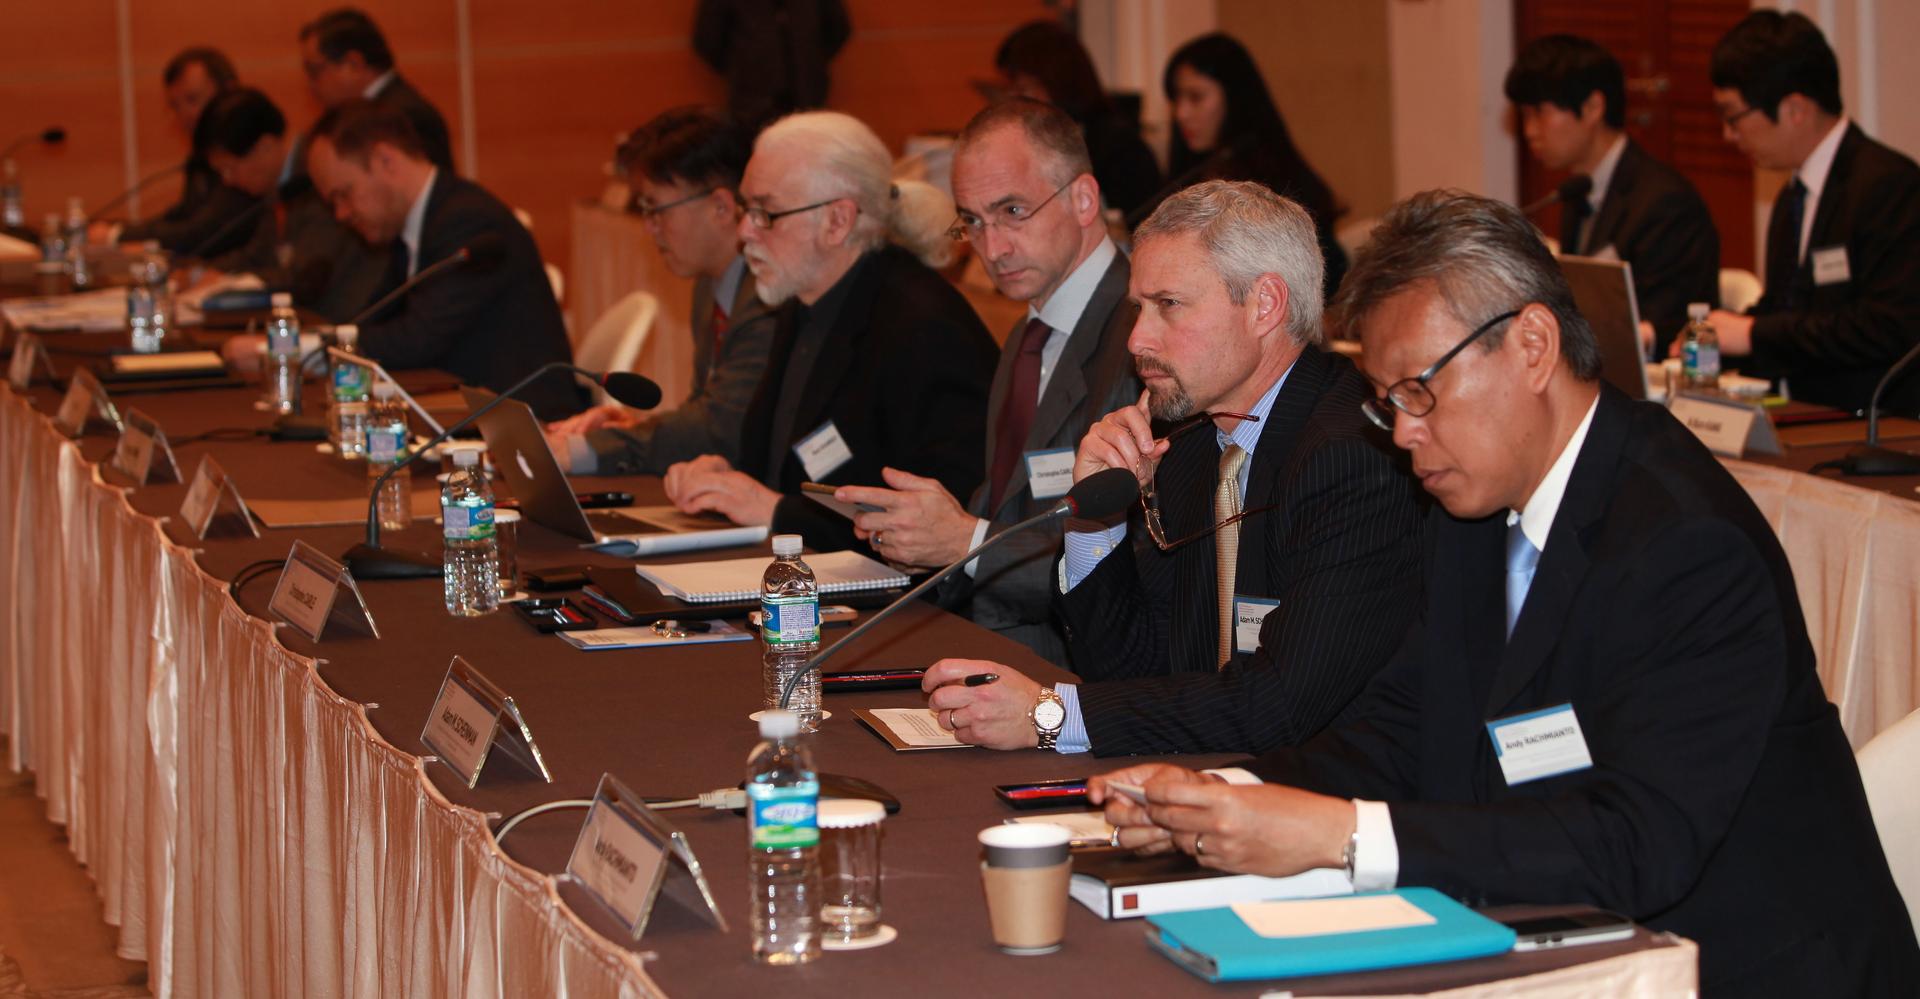 Adam Scheinman (second from right) participates in a conference on South Korea’s Jeju Island on Dec. 4, 2014.